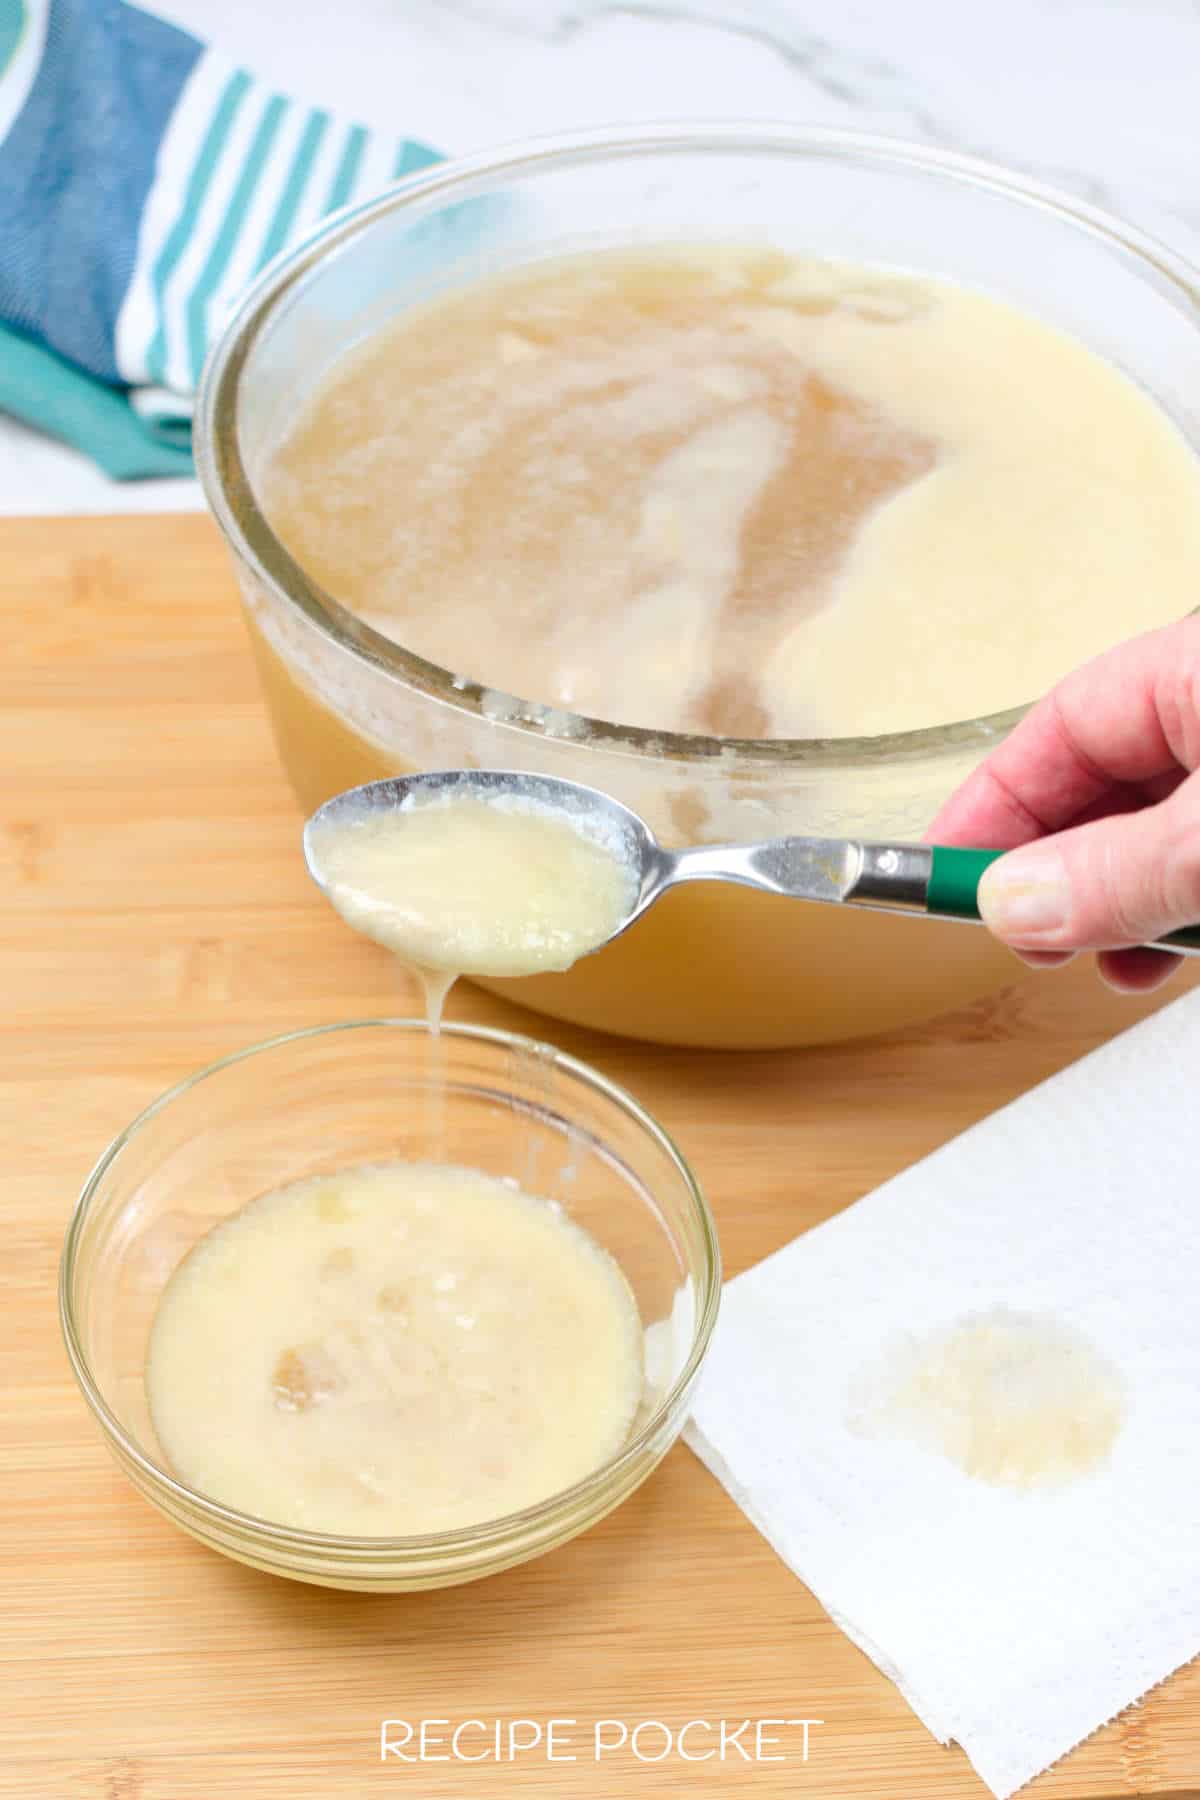 Image showing chicken fat being removed from stock with a spoon.